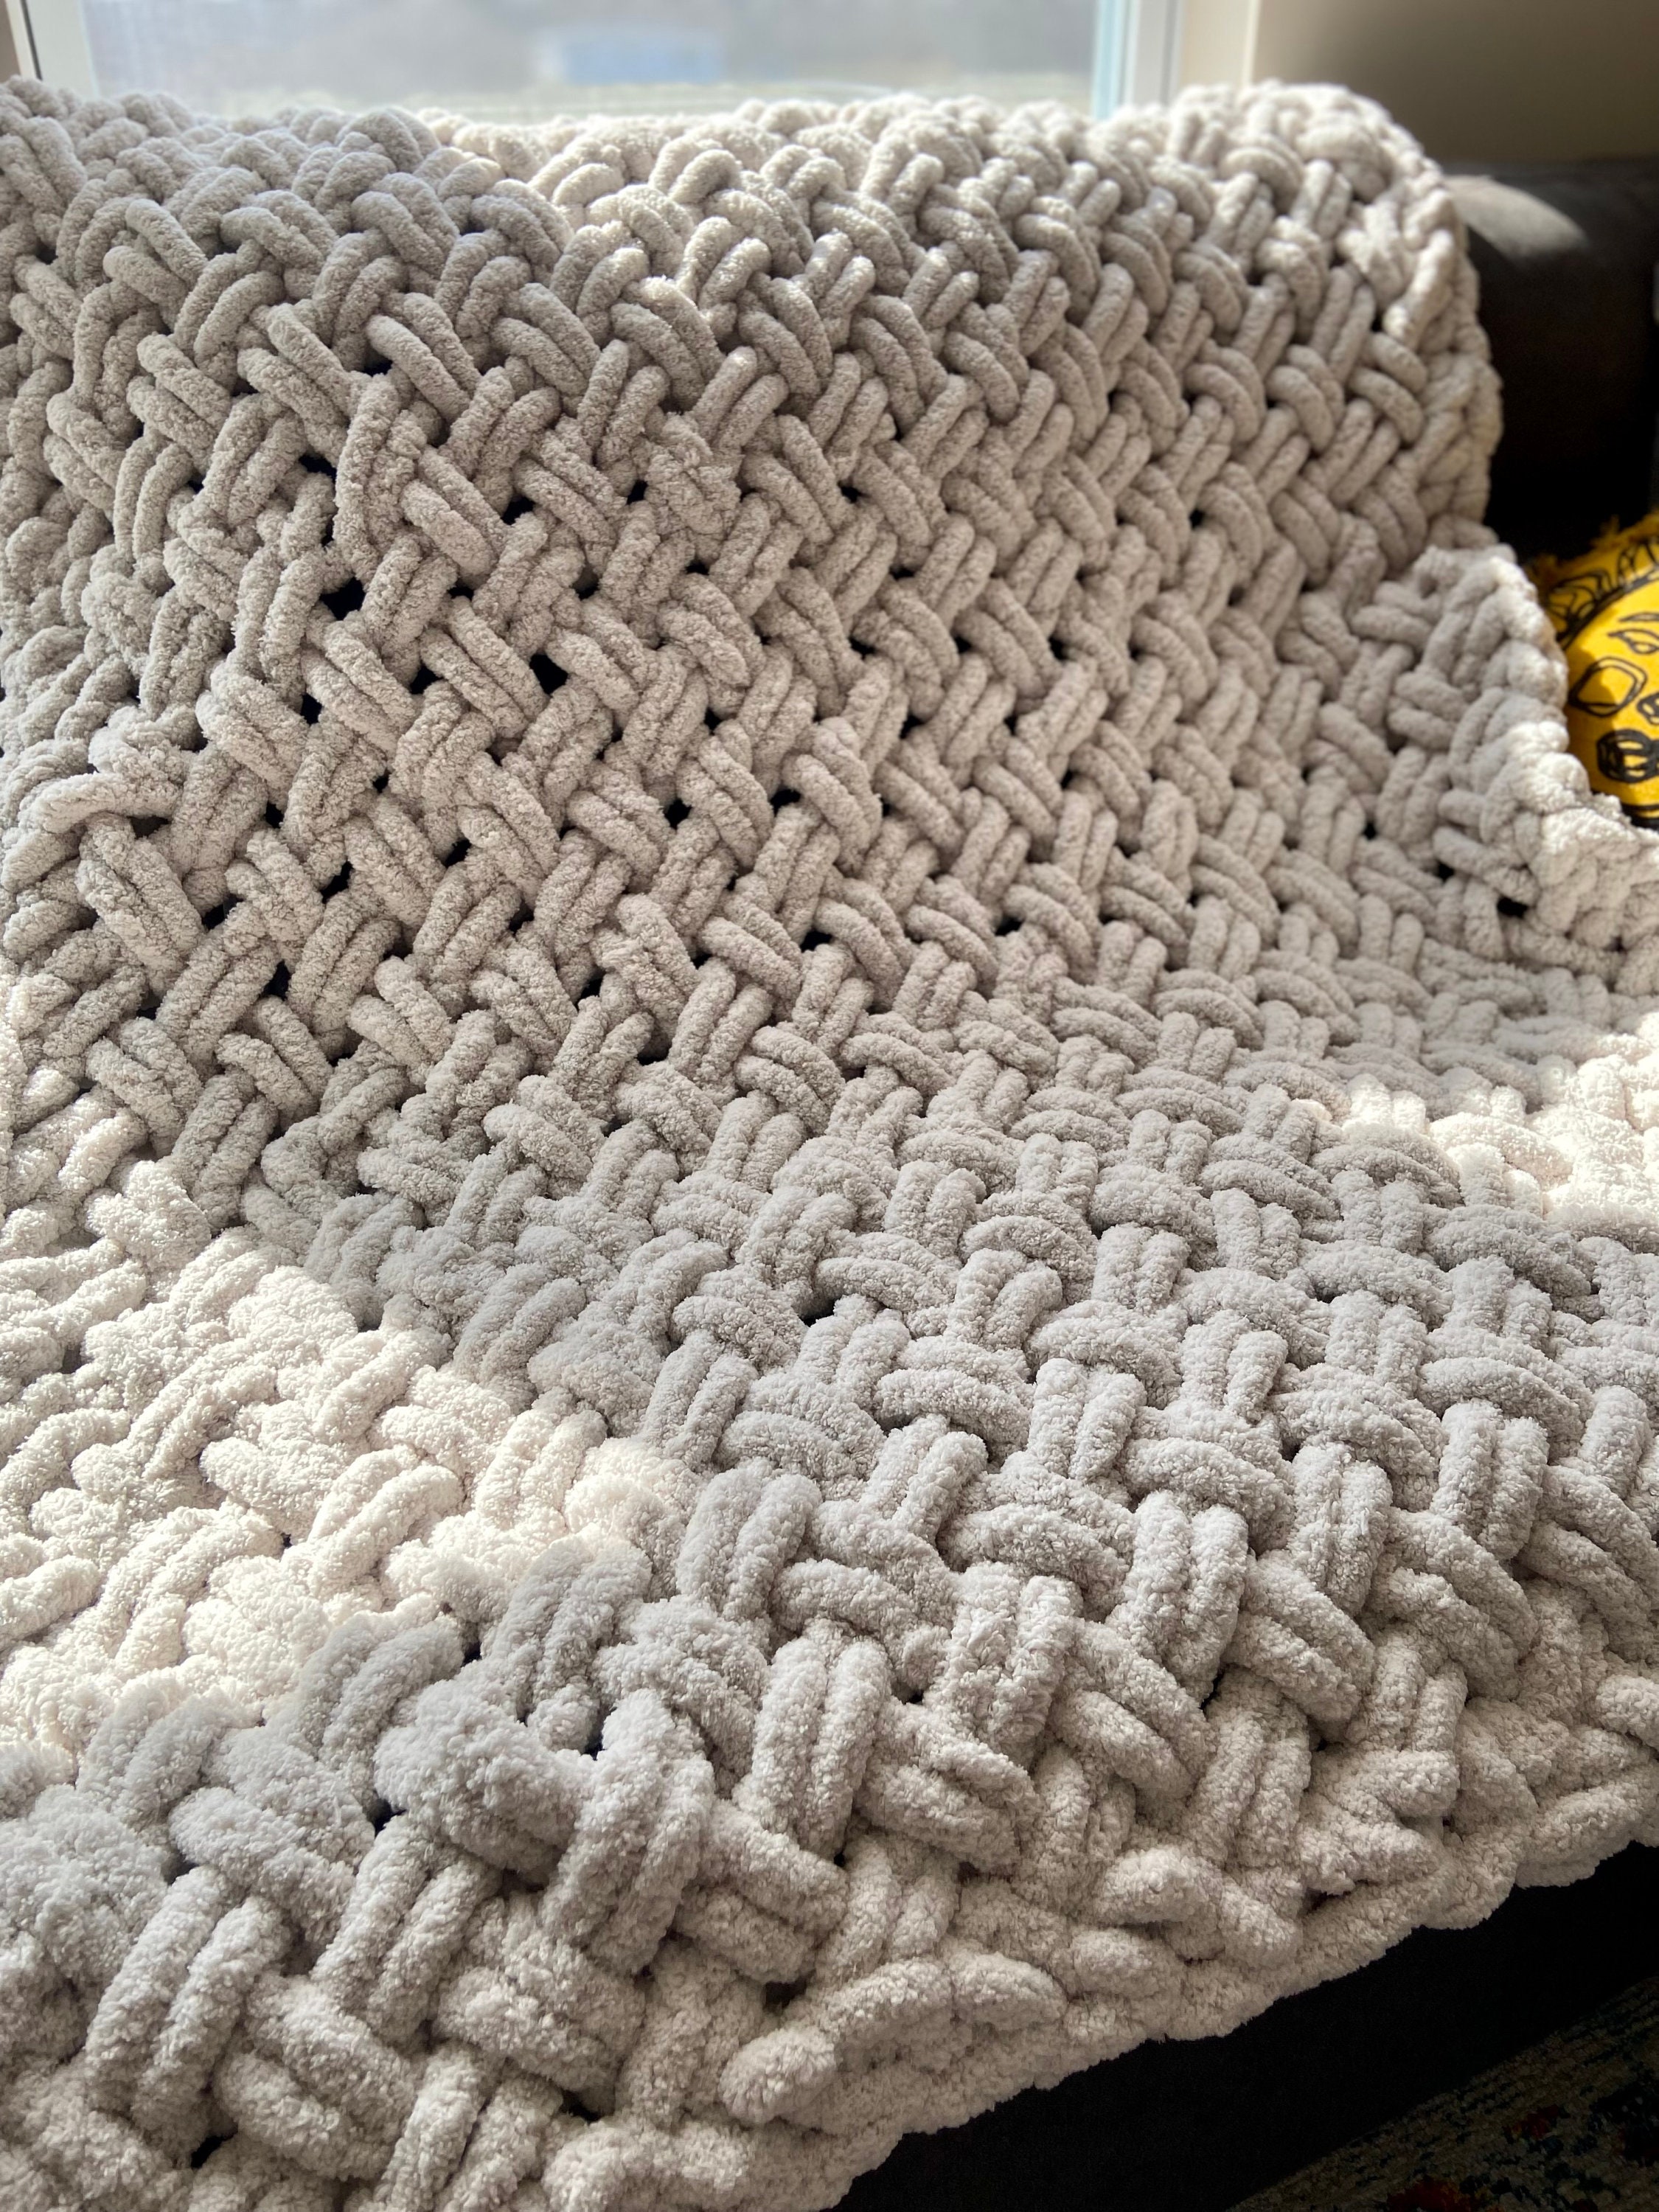 HOW TO HAND KNIT A CHUNKY CHENILLE BLANKET, BASKET WEAVE PATTERN 